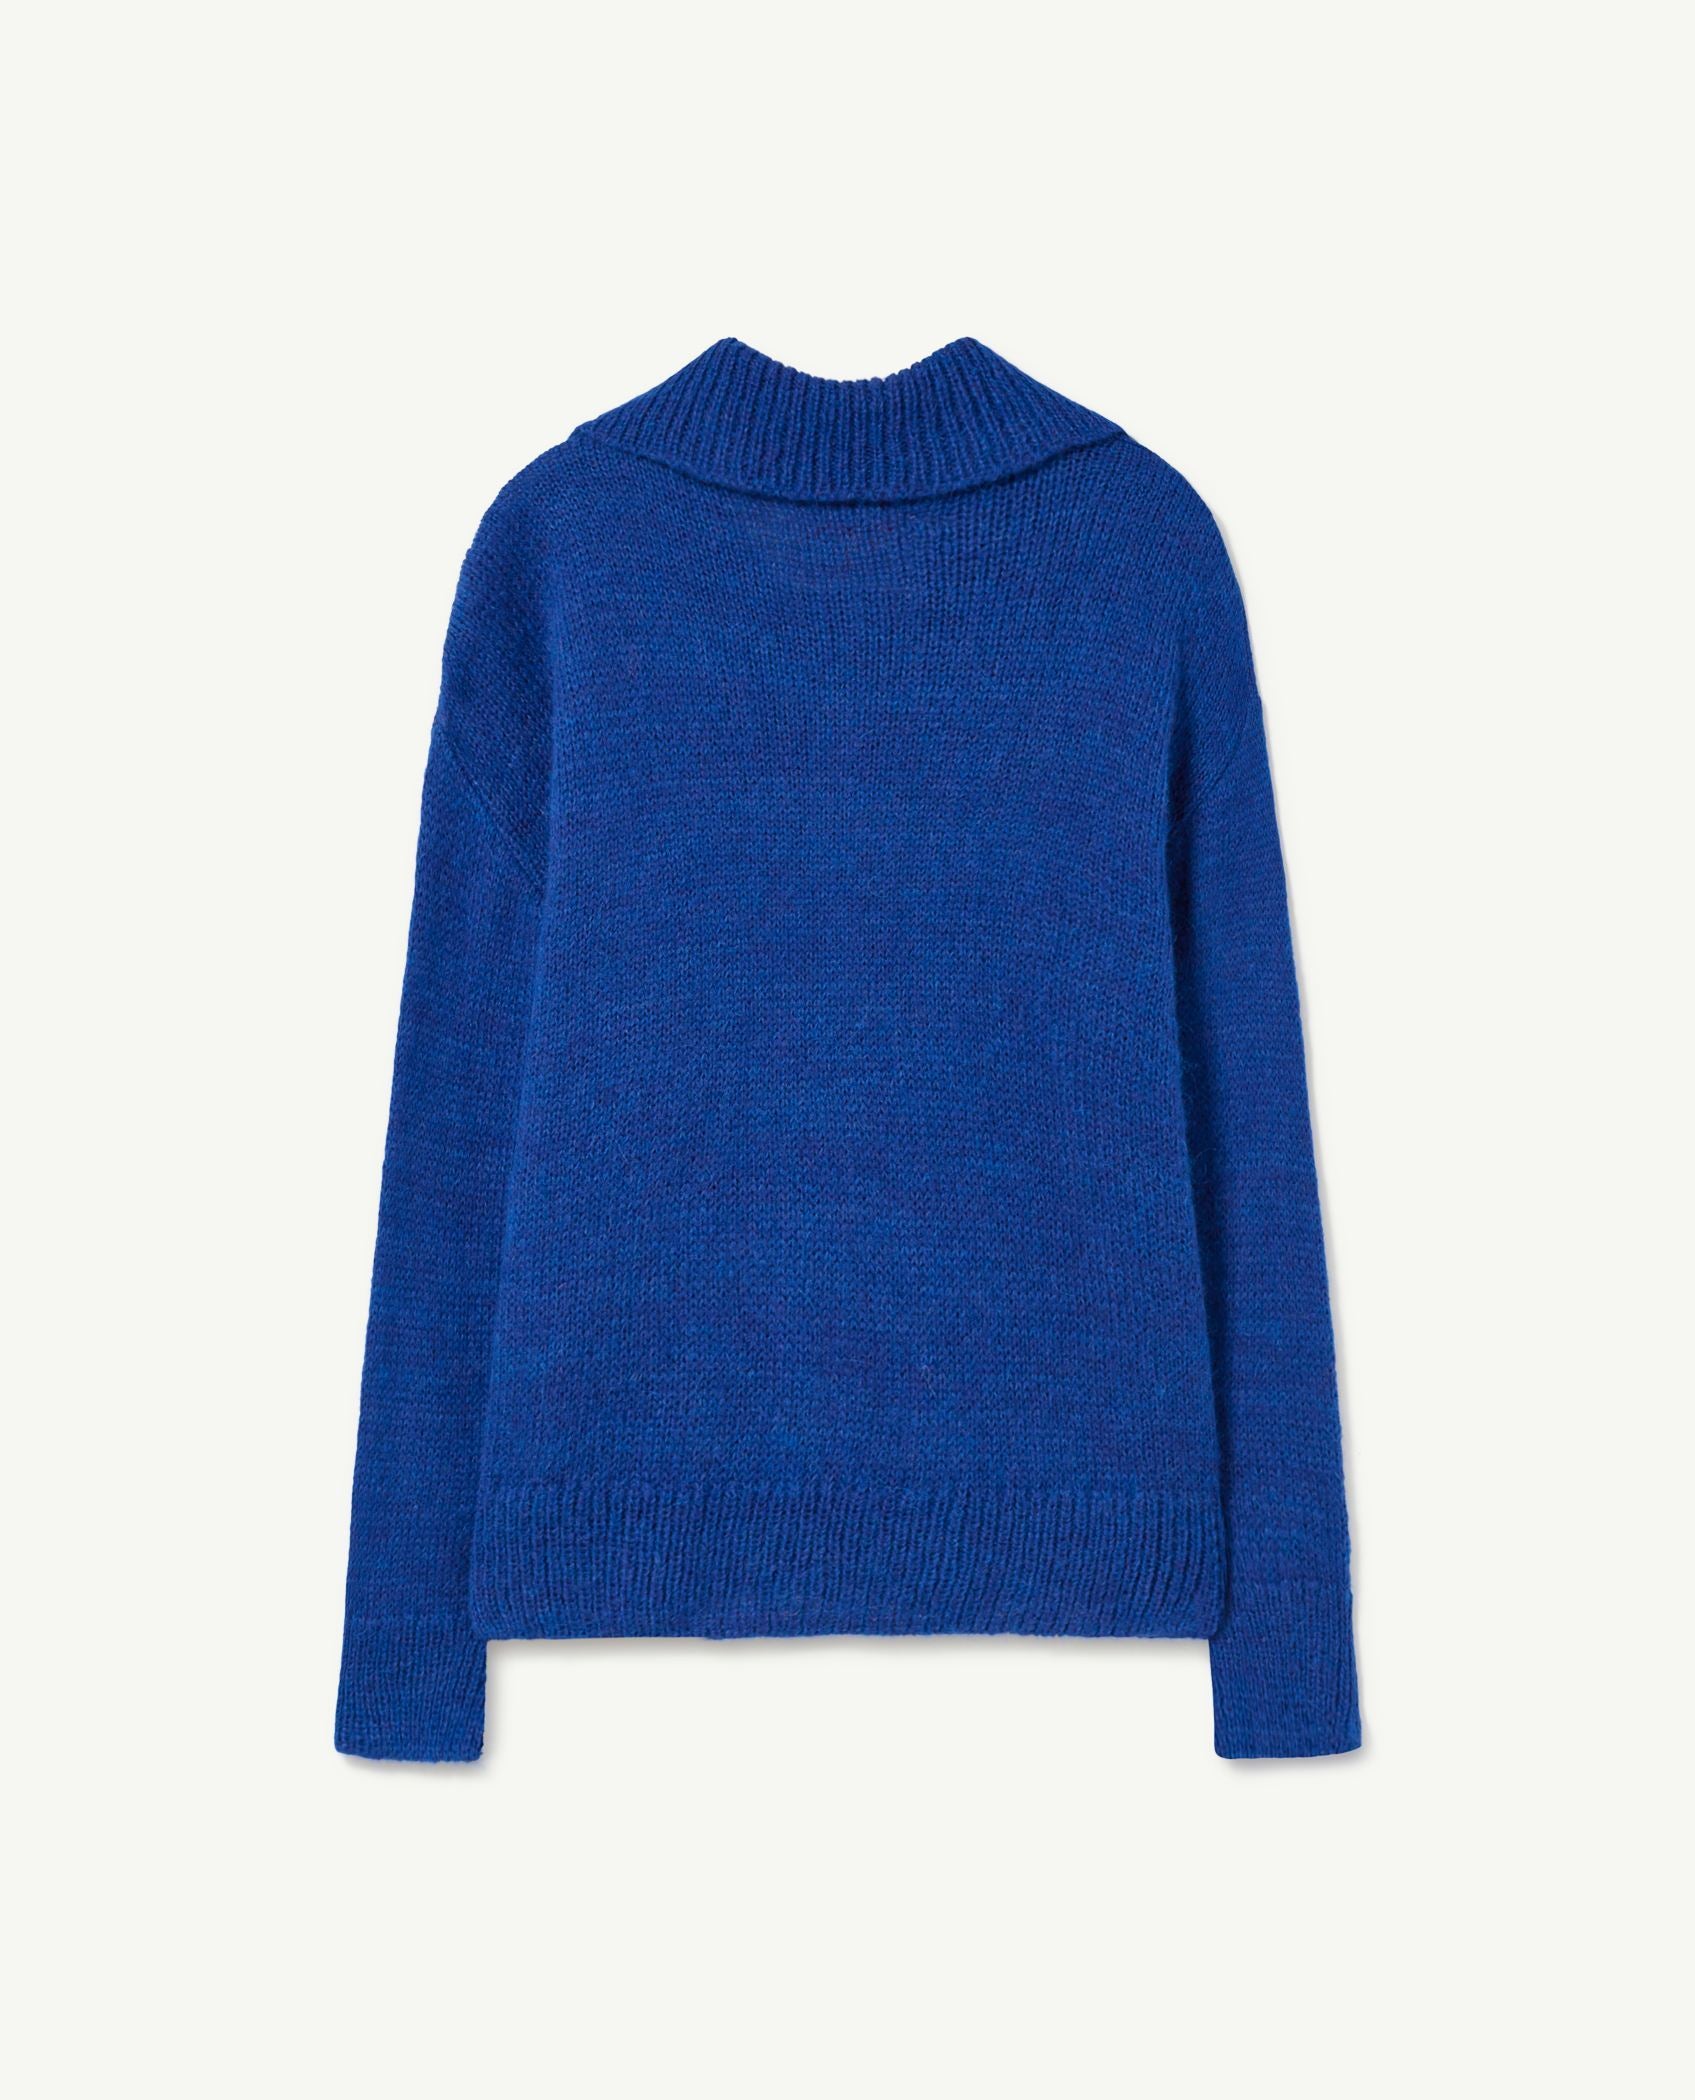 Blue Raven Sweater PRODUCT BACK